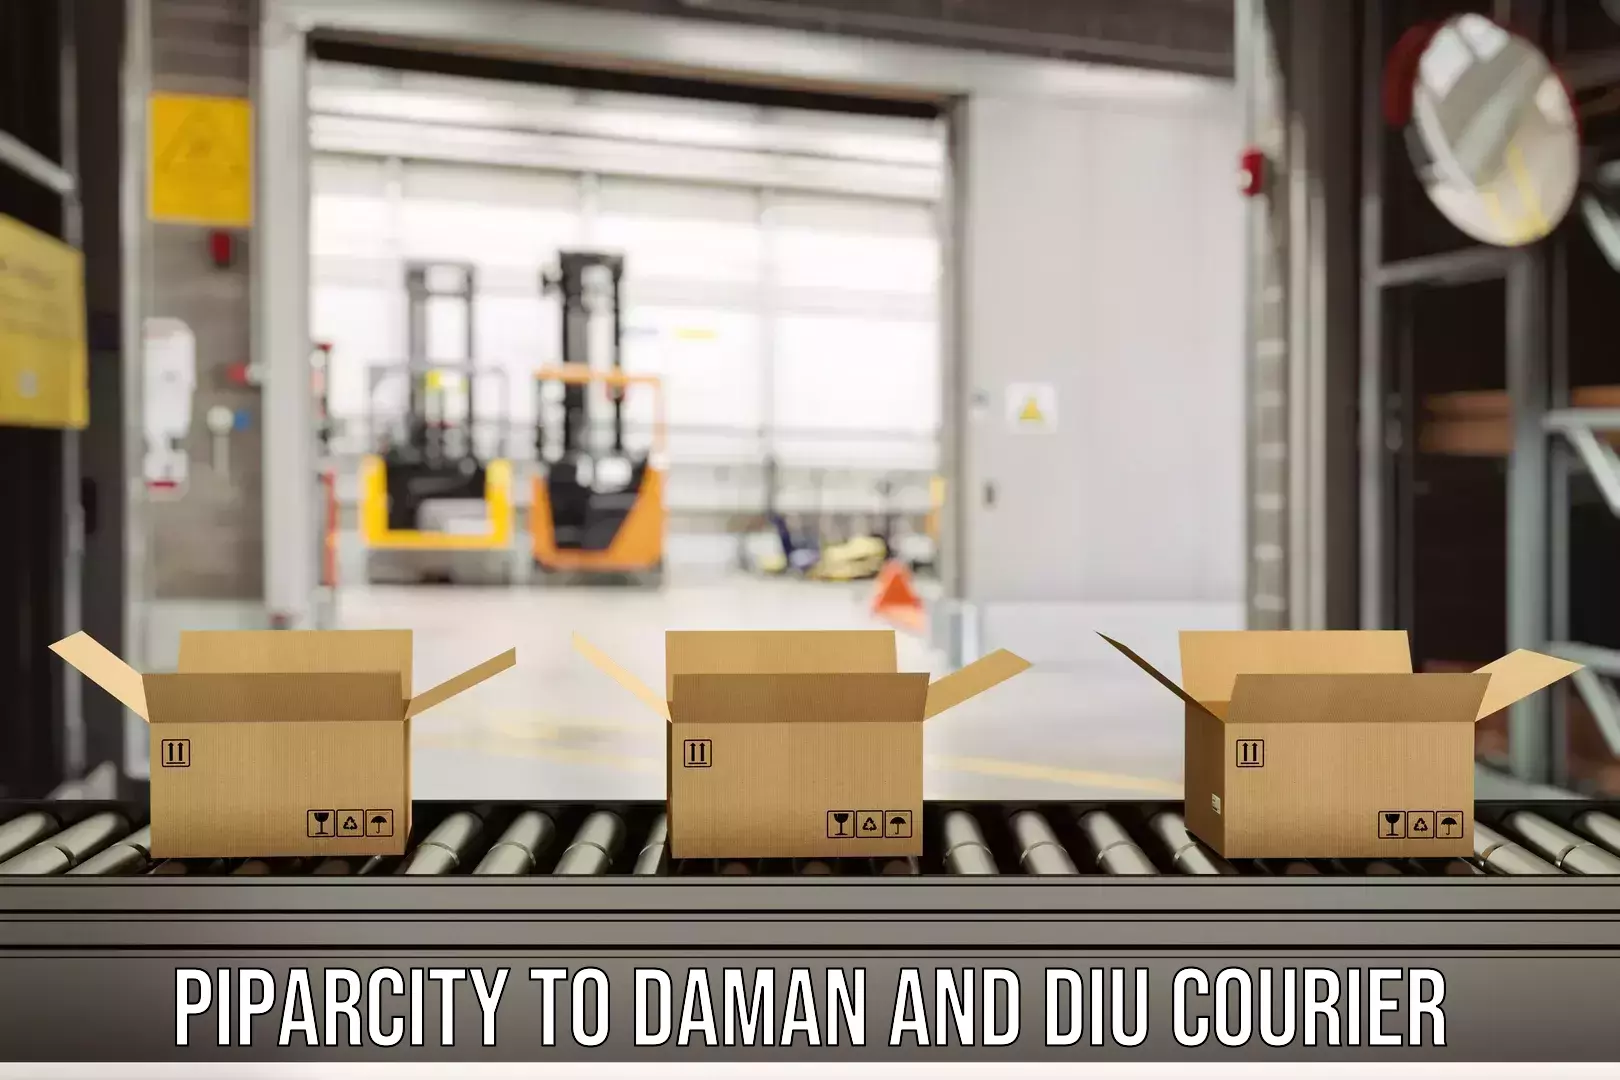 Small parcel delivery Piparcity to Diu